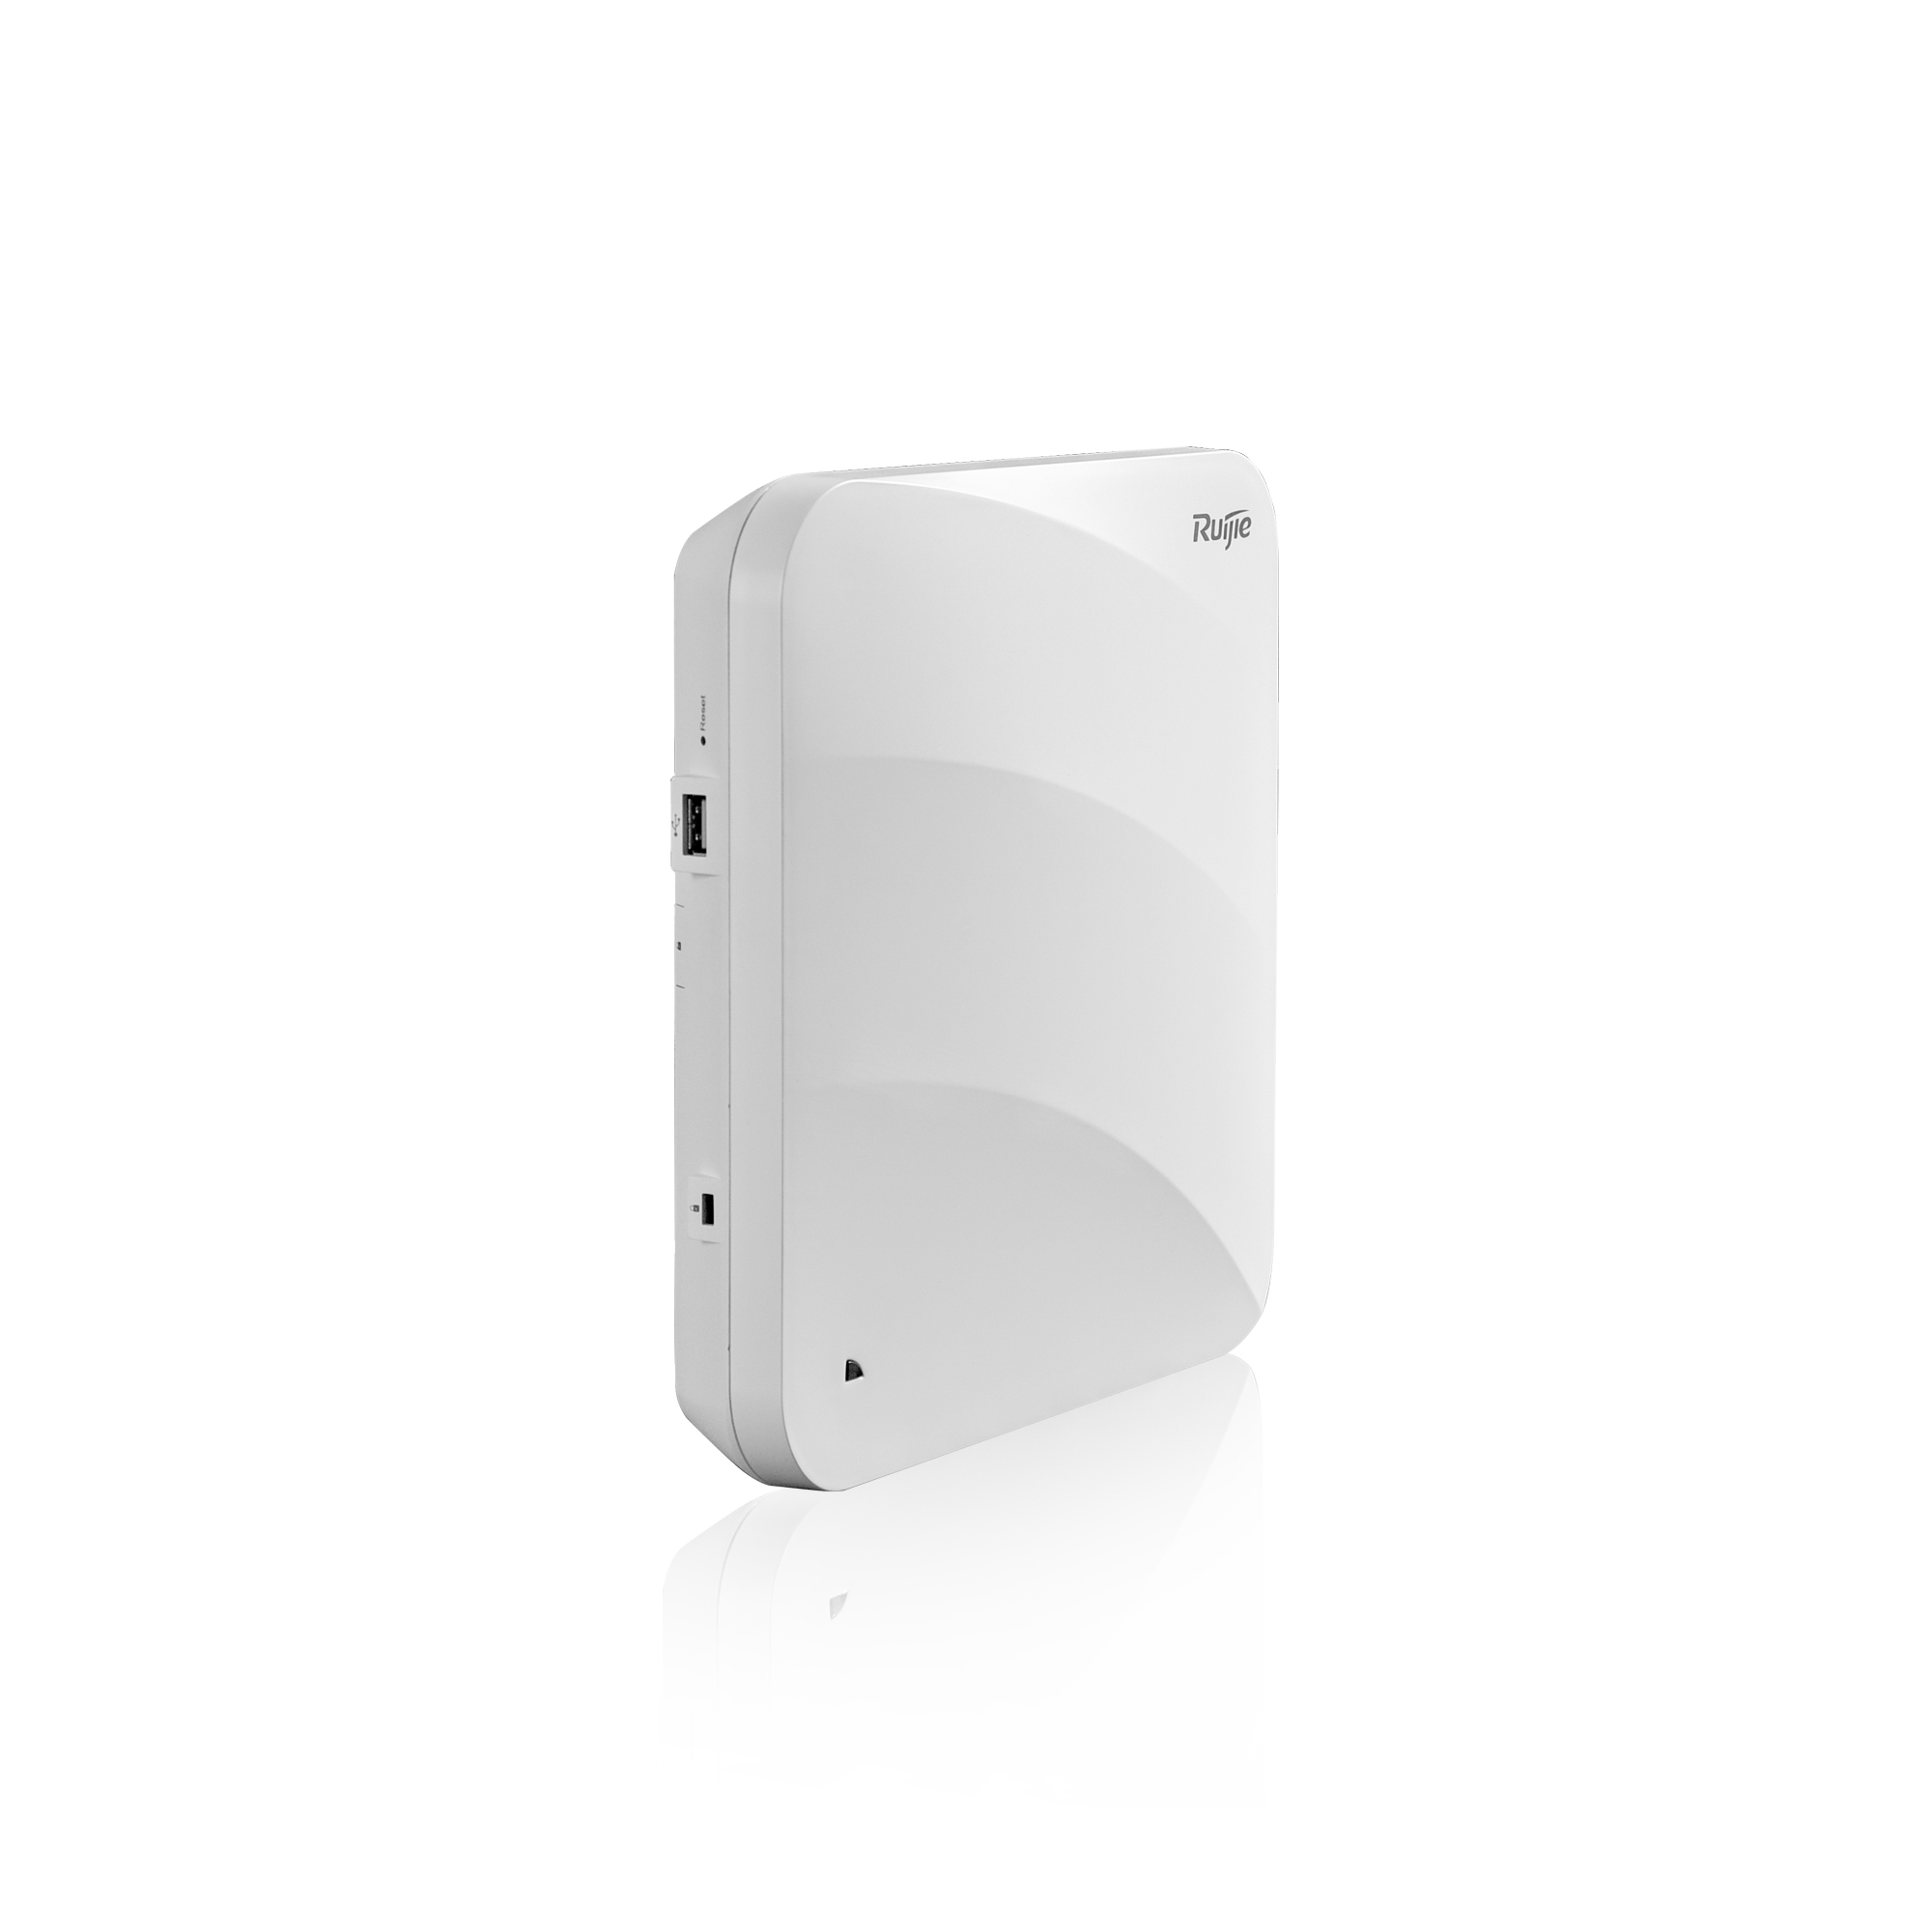 RUIJIE RG-AP740-I 1733MBPS 2PORT 4X4 MU-MIMO 2.4 GHZ & 5 GHZ INDOOR WAVE2 ACCESS POINT  